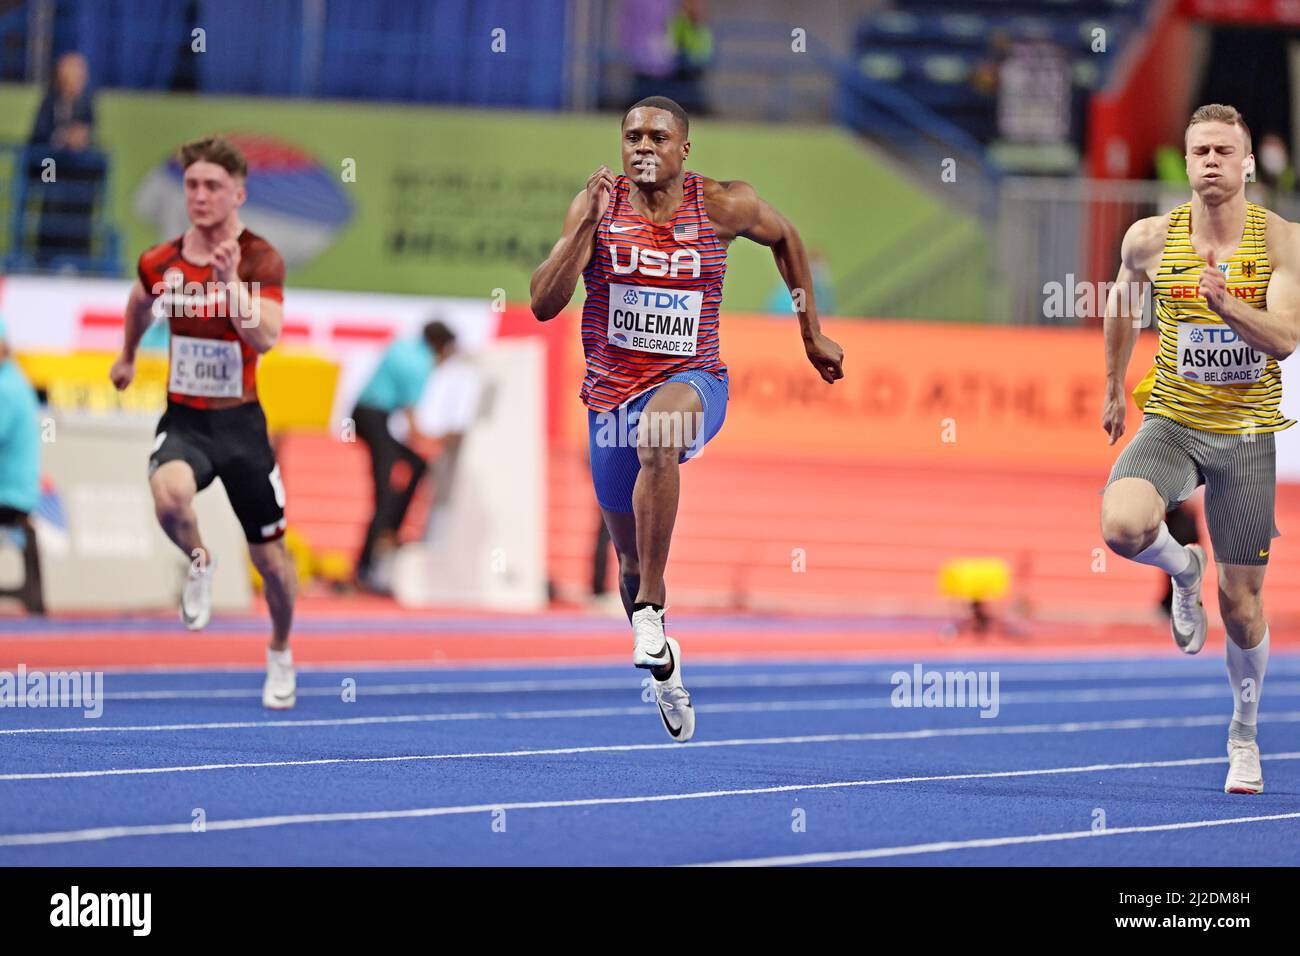 Christian Coleman (USA) places second in the 60m in 6.41 during the World Athletics Indoor Championships, Saturday, Mar. 19, 2022, in Belgrade, Serbia Stock Photo